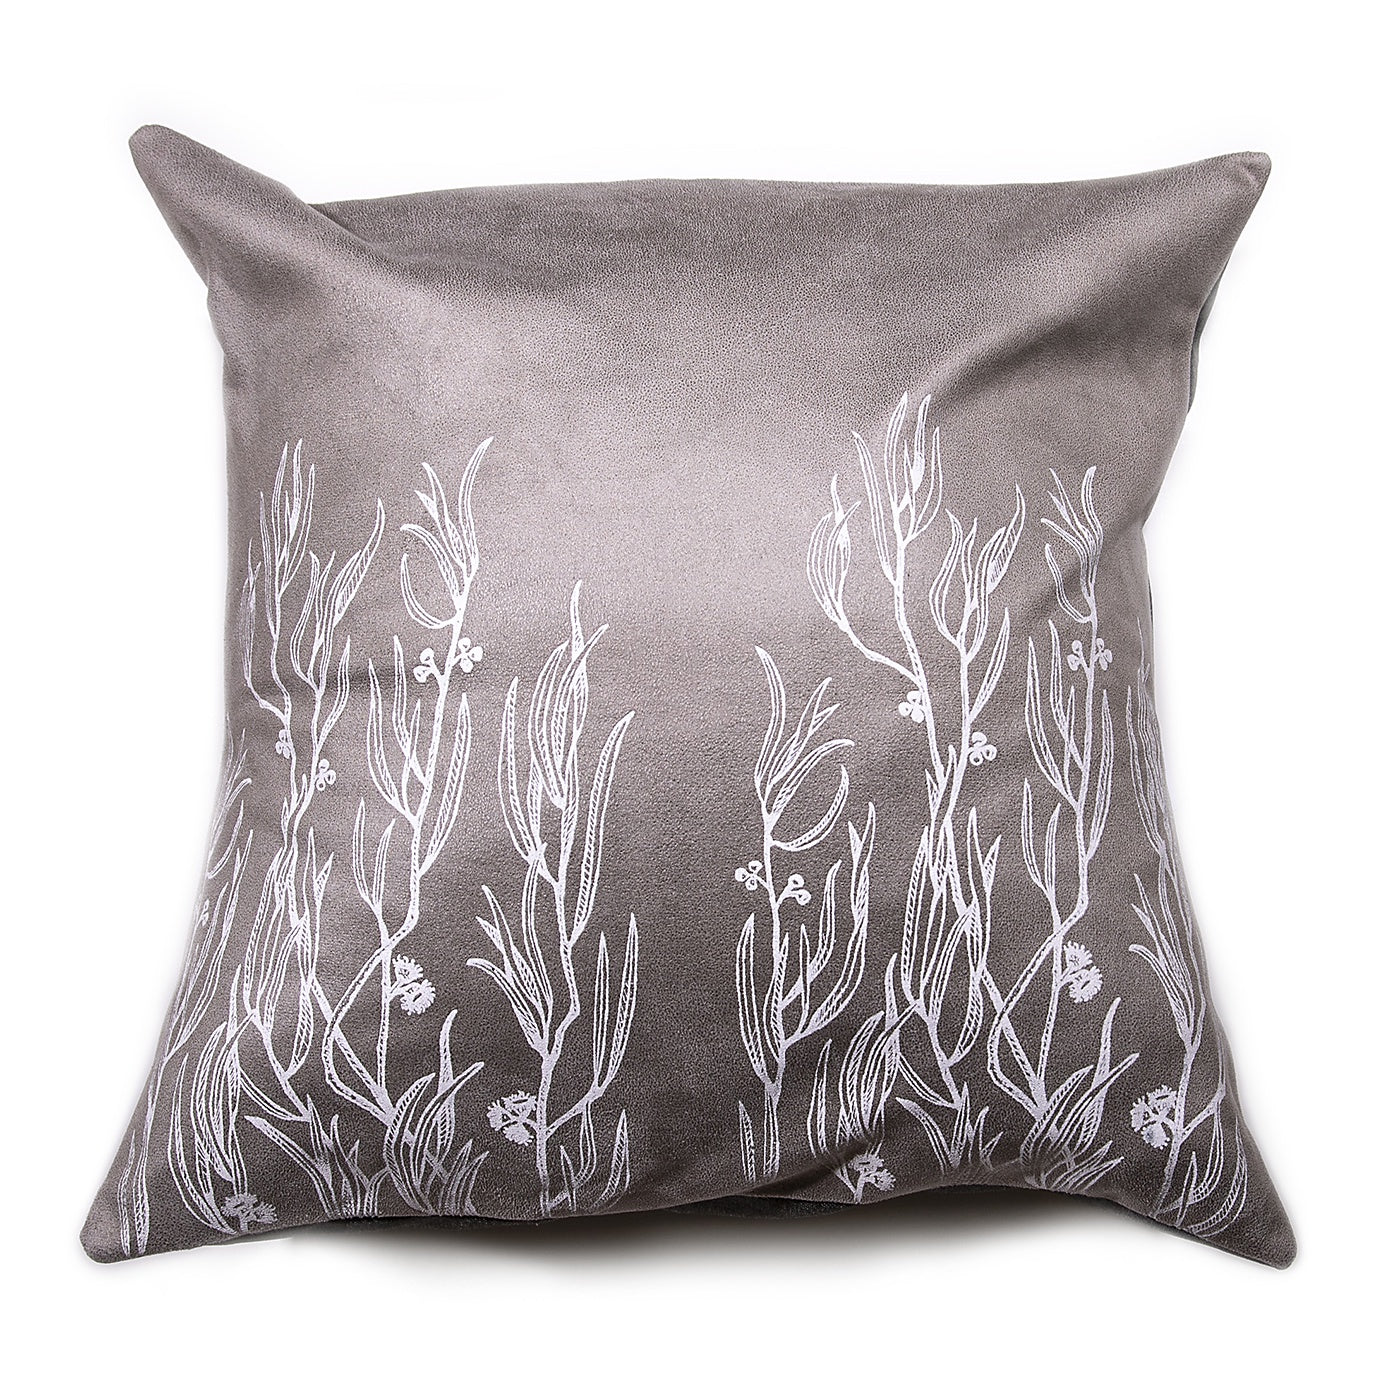 Stalley Textile Co. - Cushion Cover - Peppermint - White on Light Grey